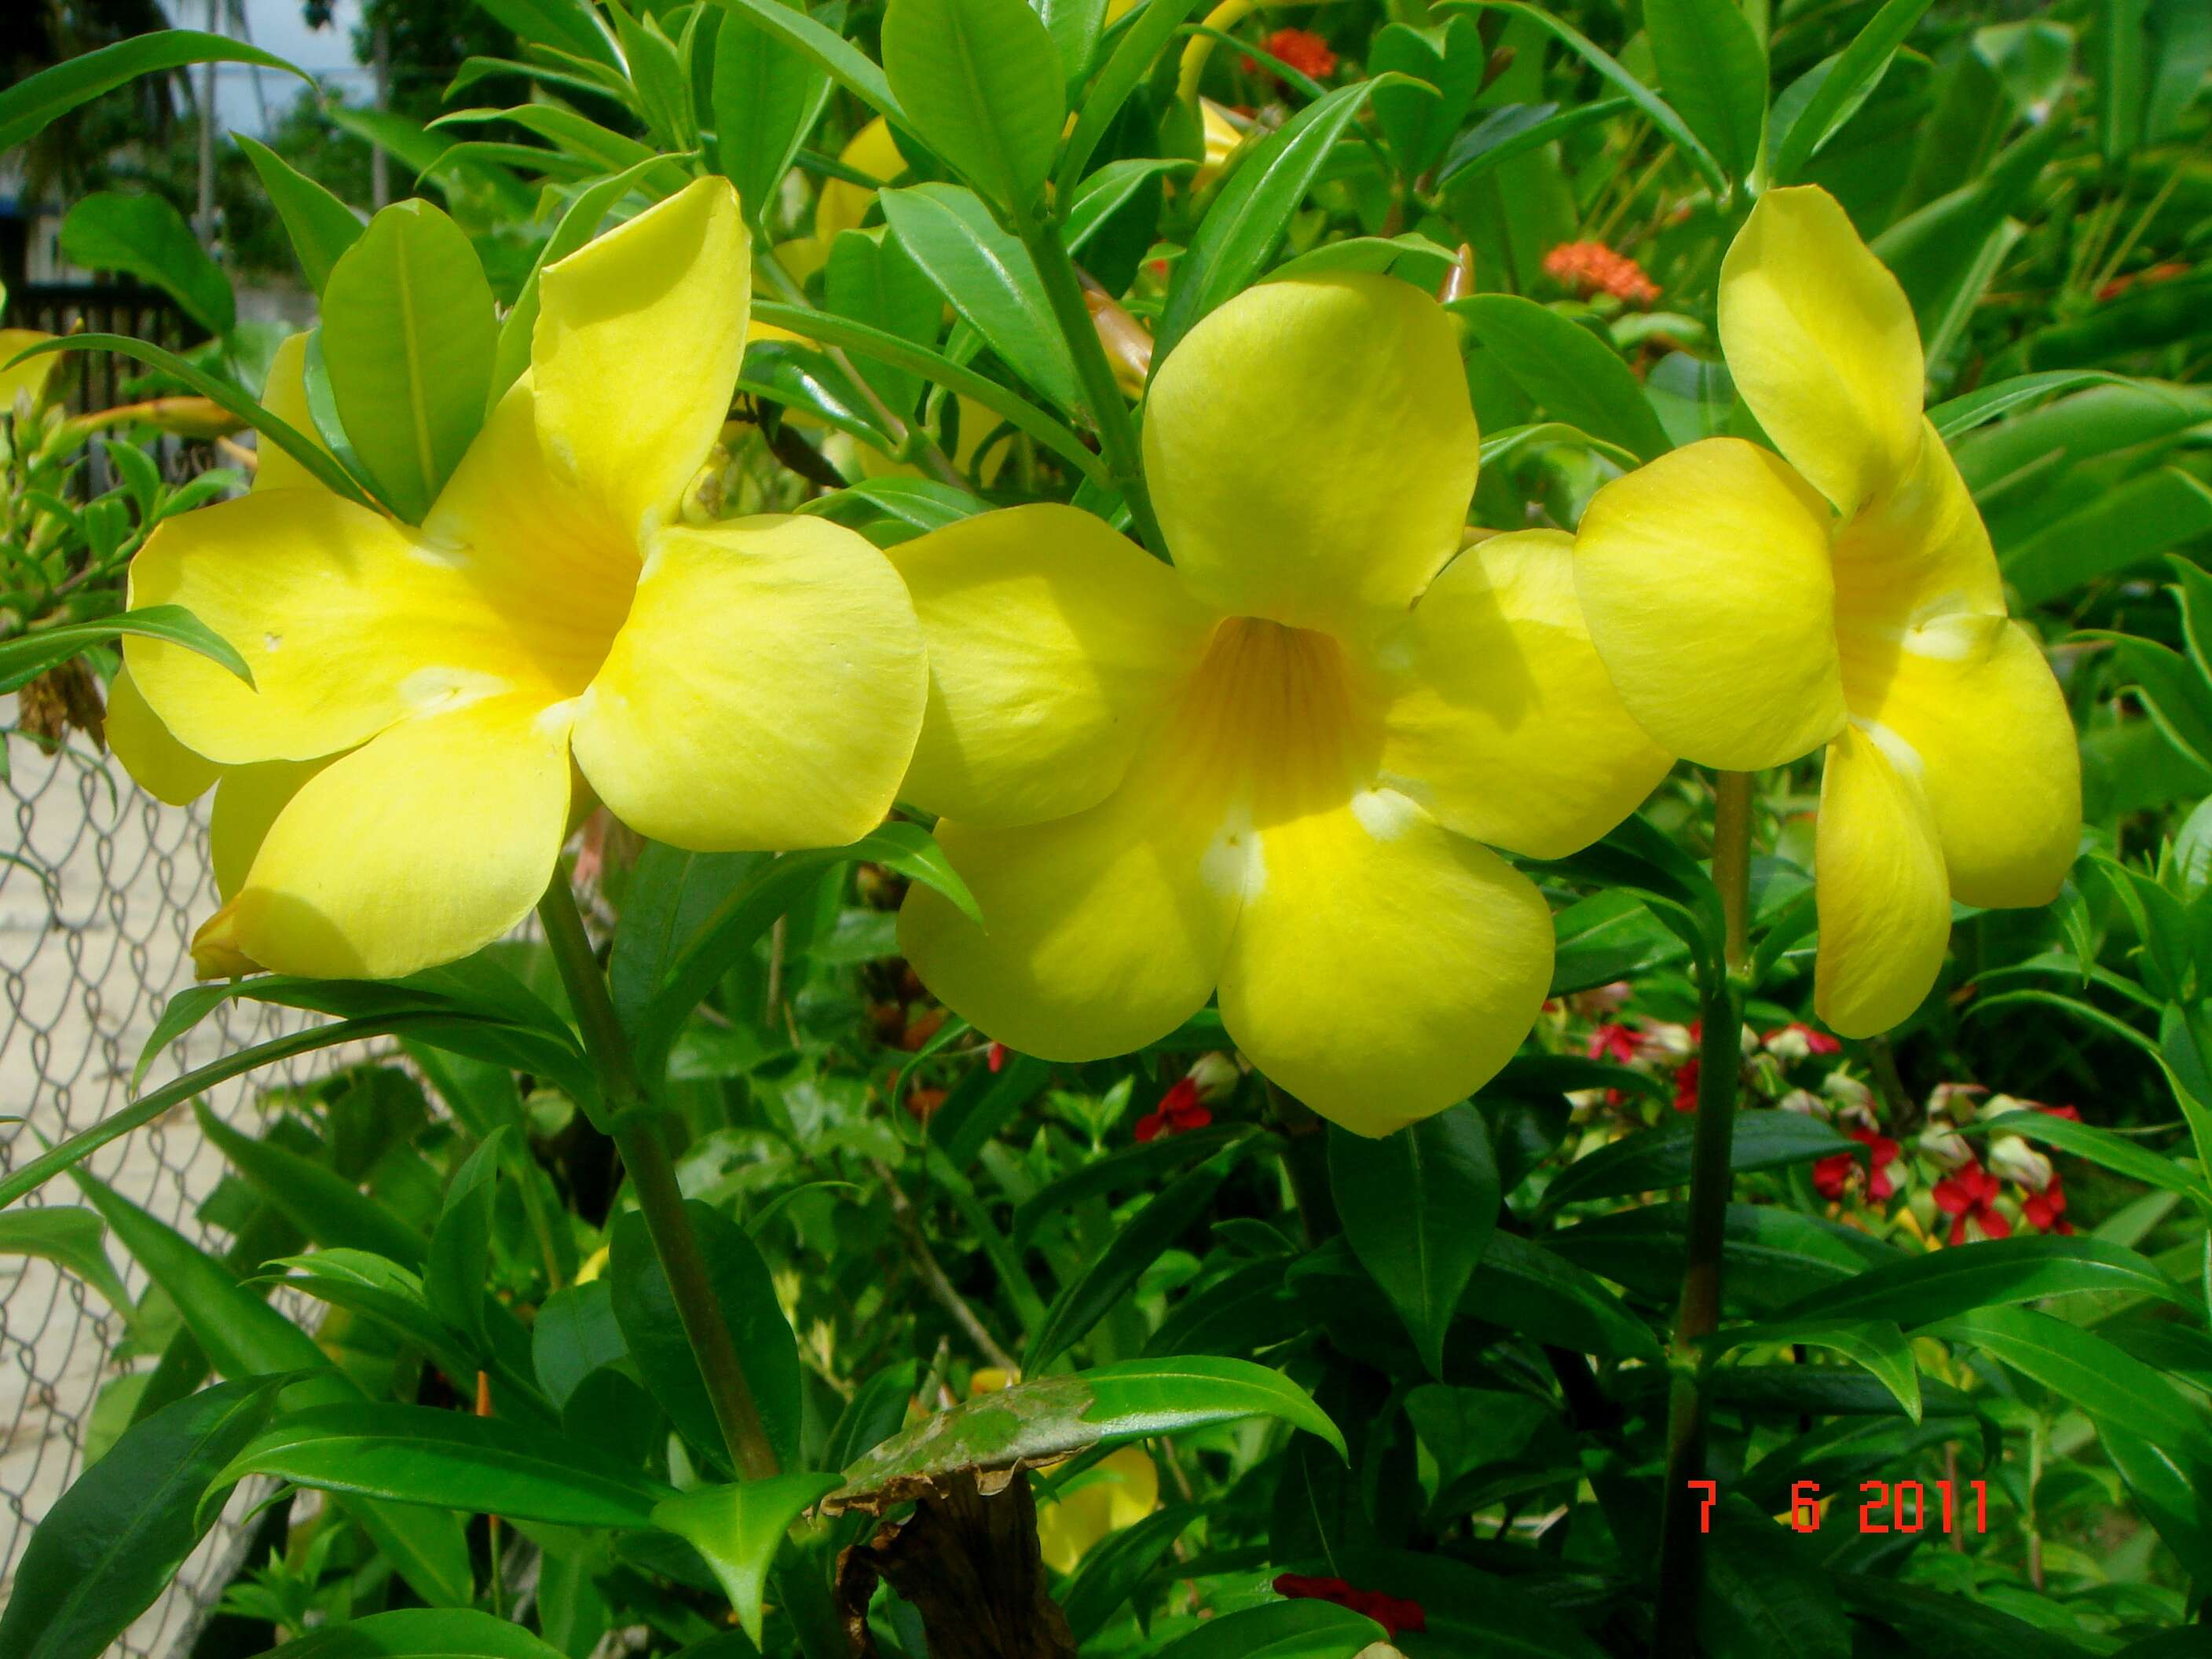 Image of Golden Trumpet or Buttercup Flower